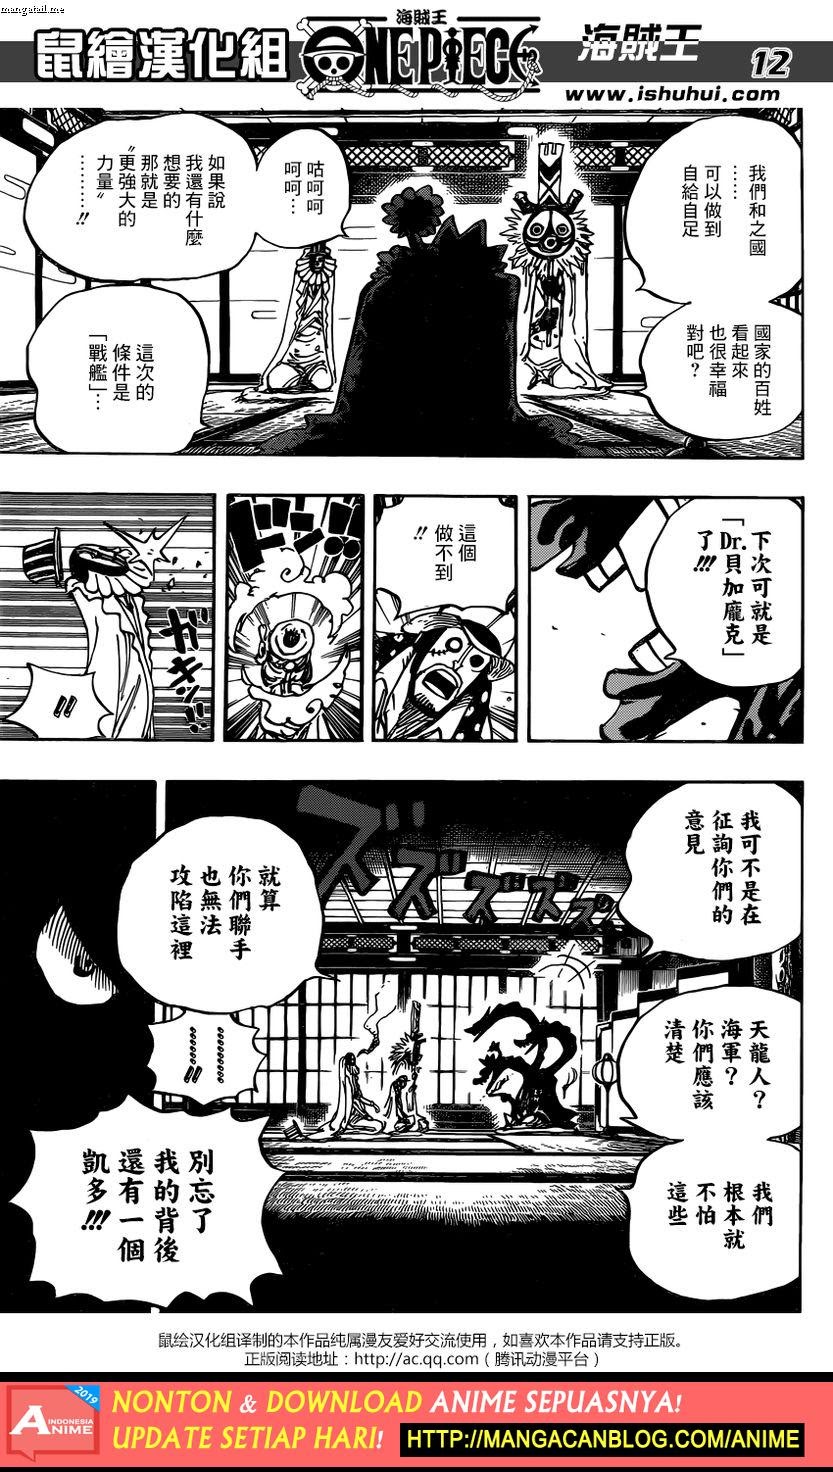 One Piece Chapter 928 – Raw - 113